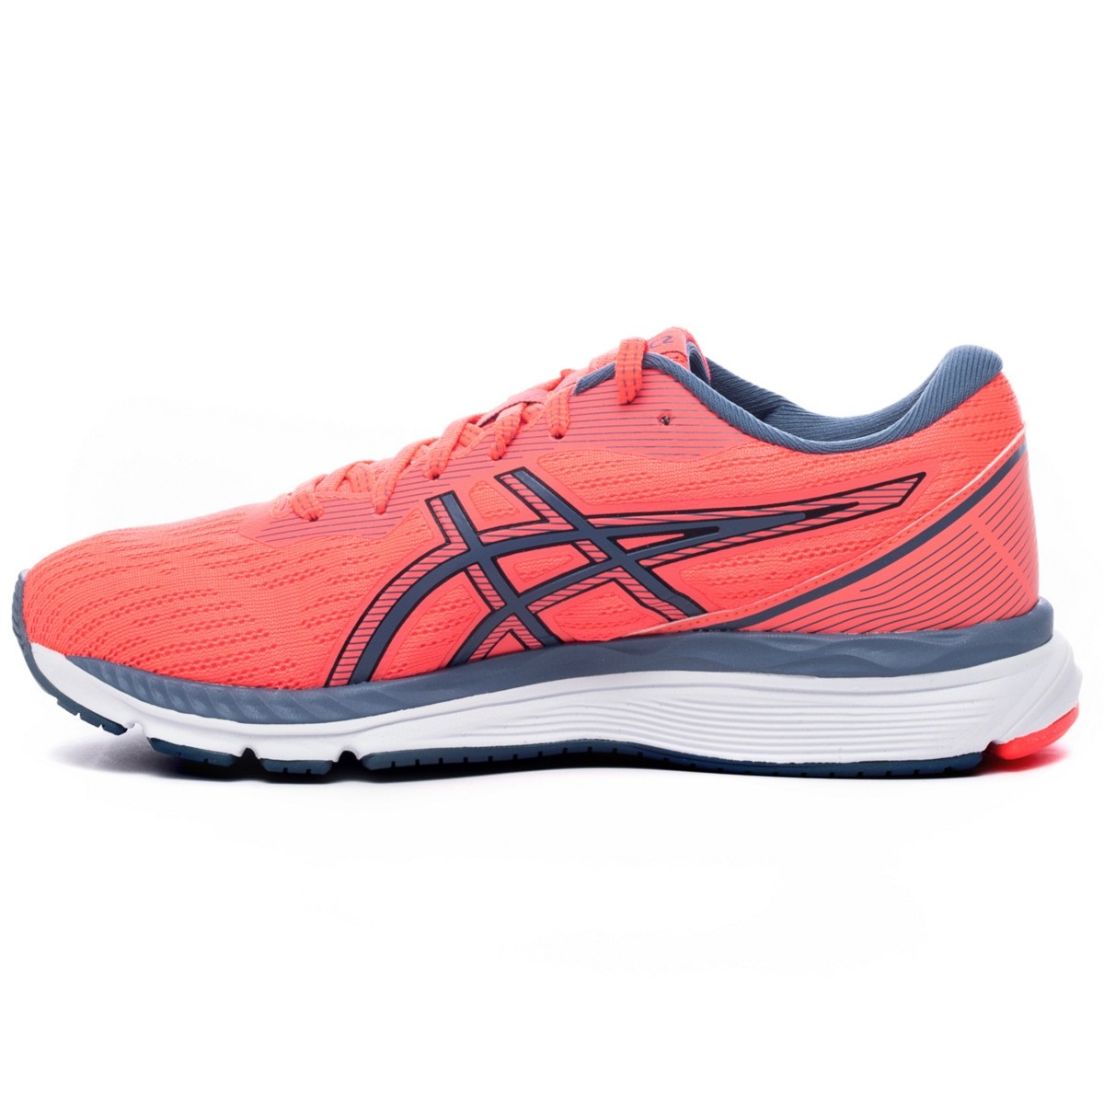 Asics Pacemaker 2 Mujer - Sporting